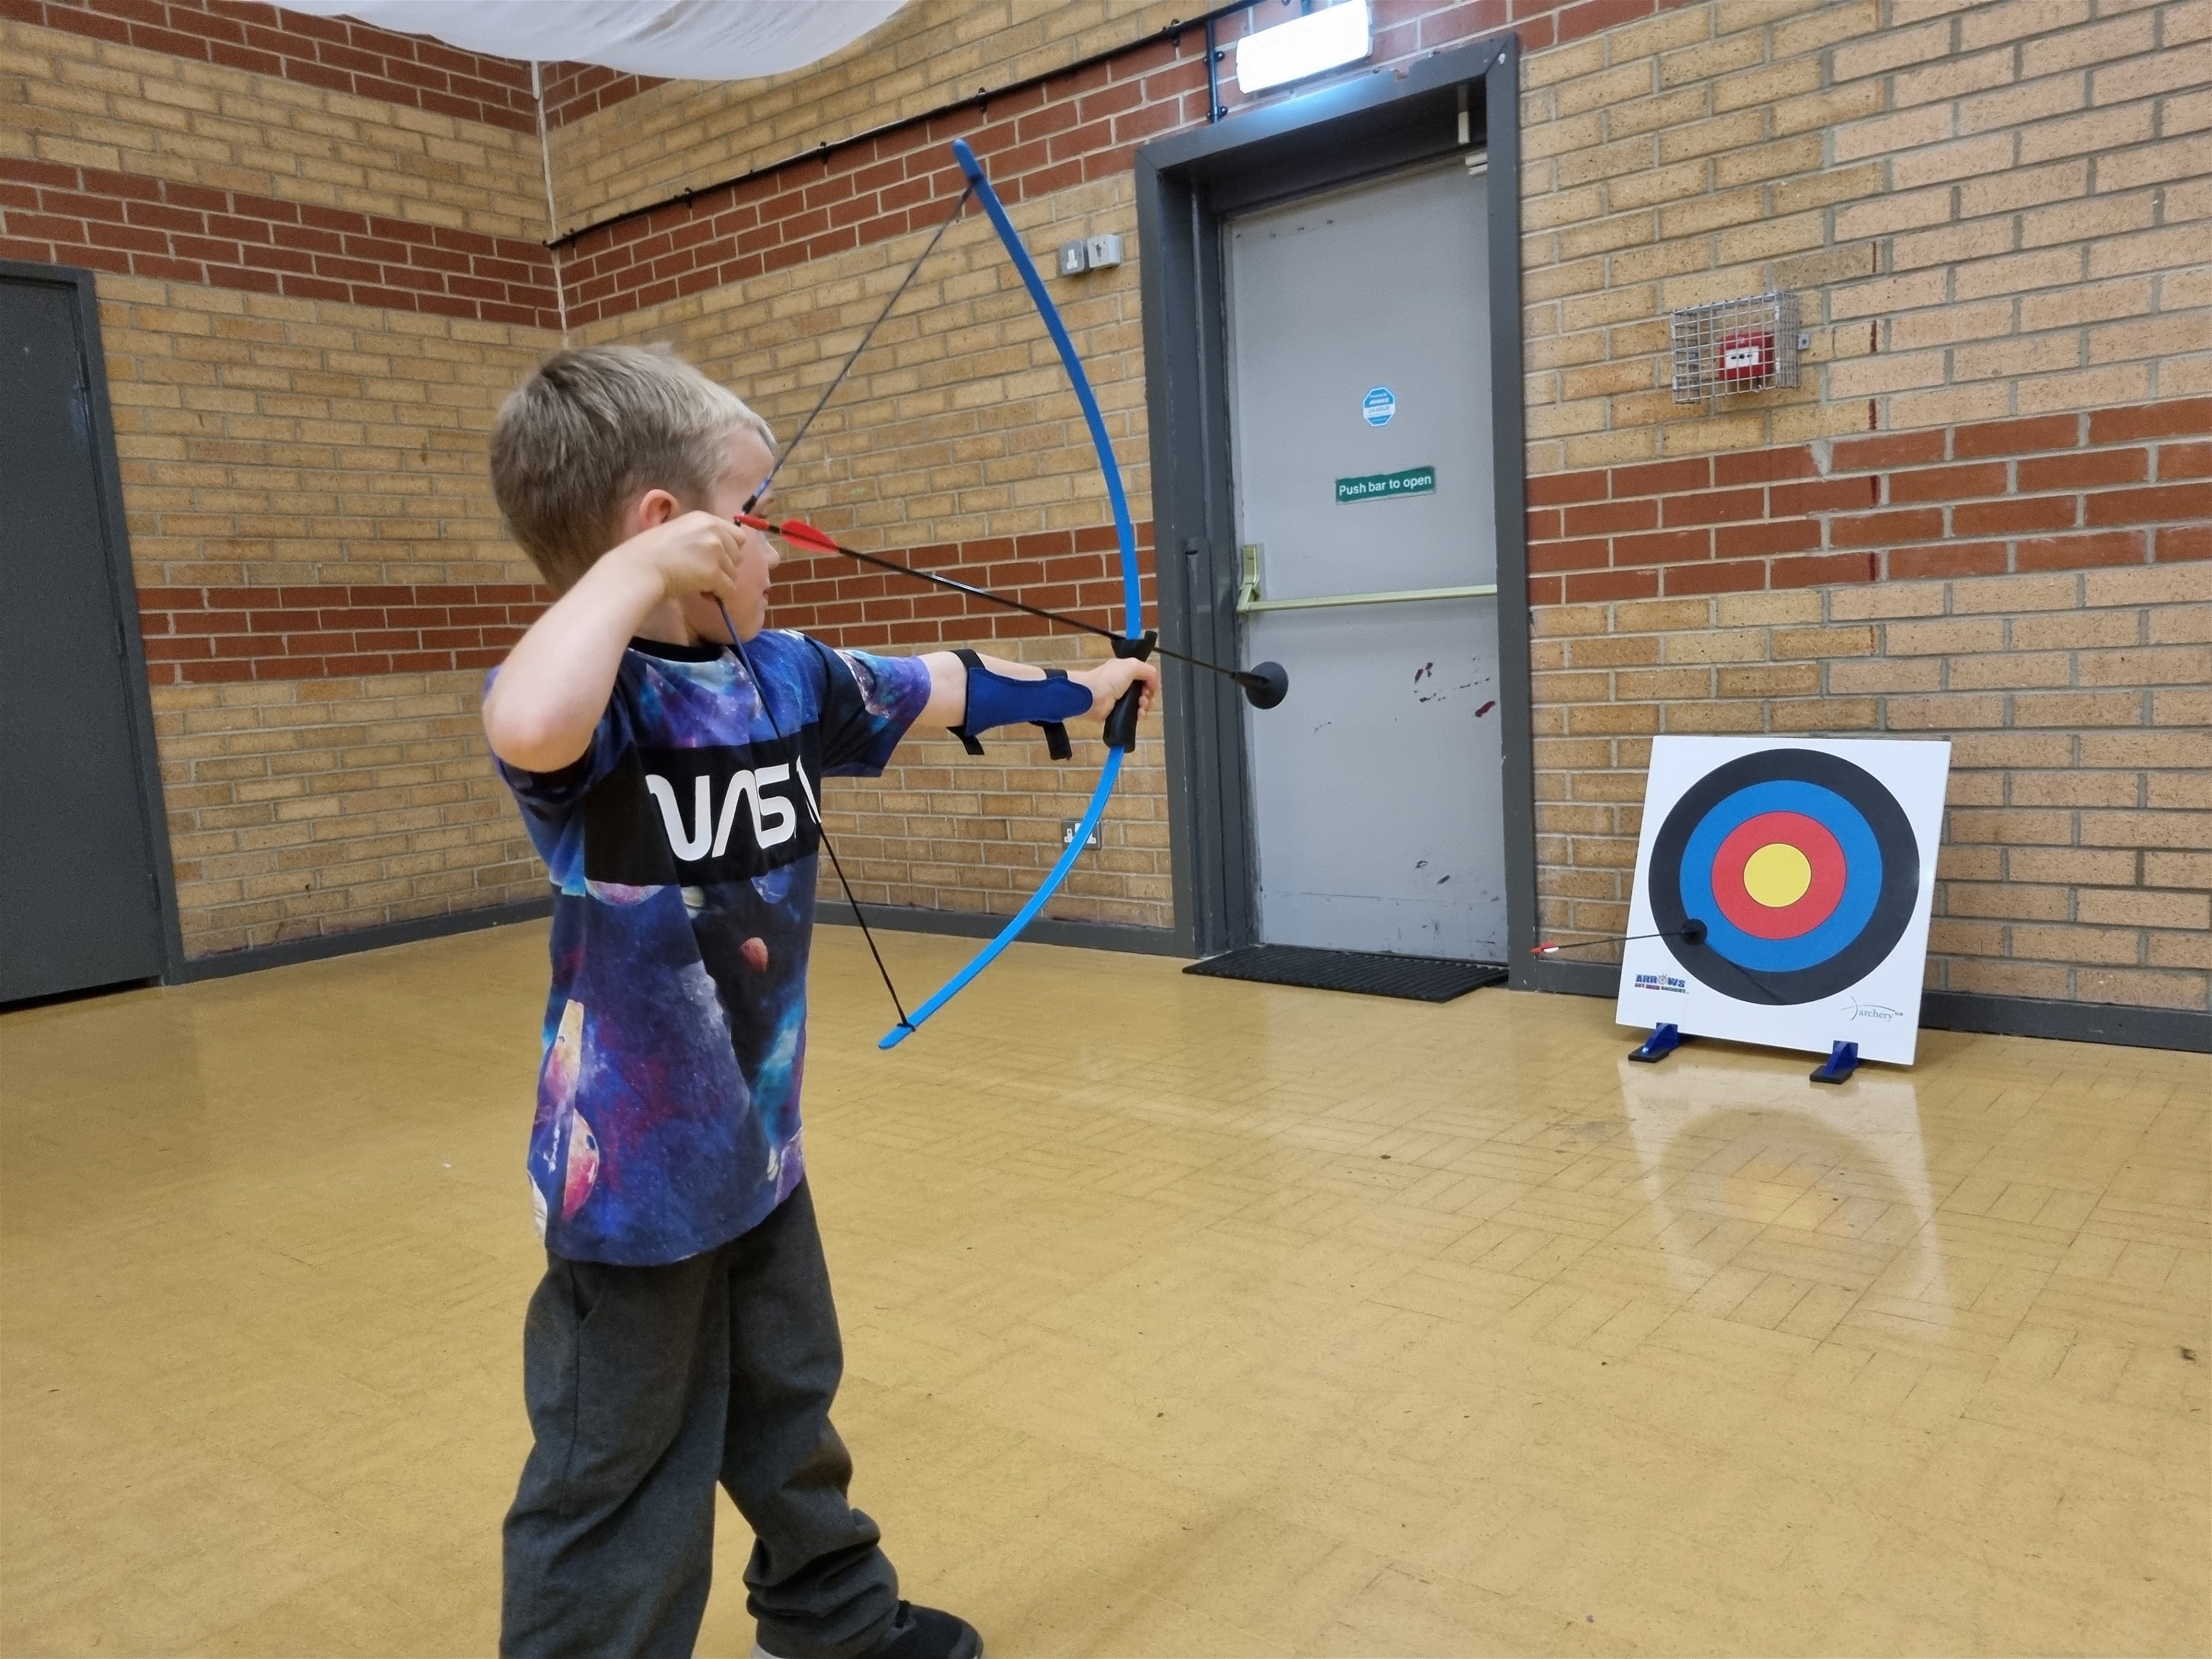 Kids' Archery - for the little ones!